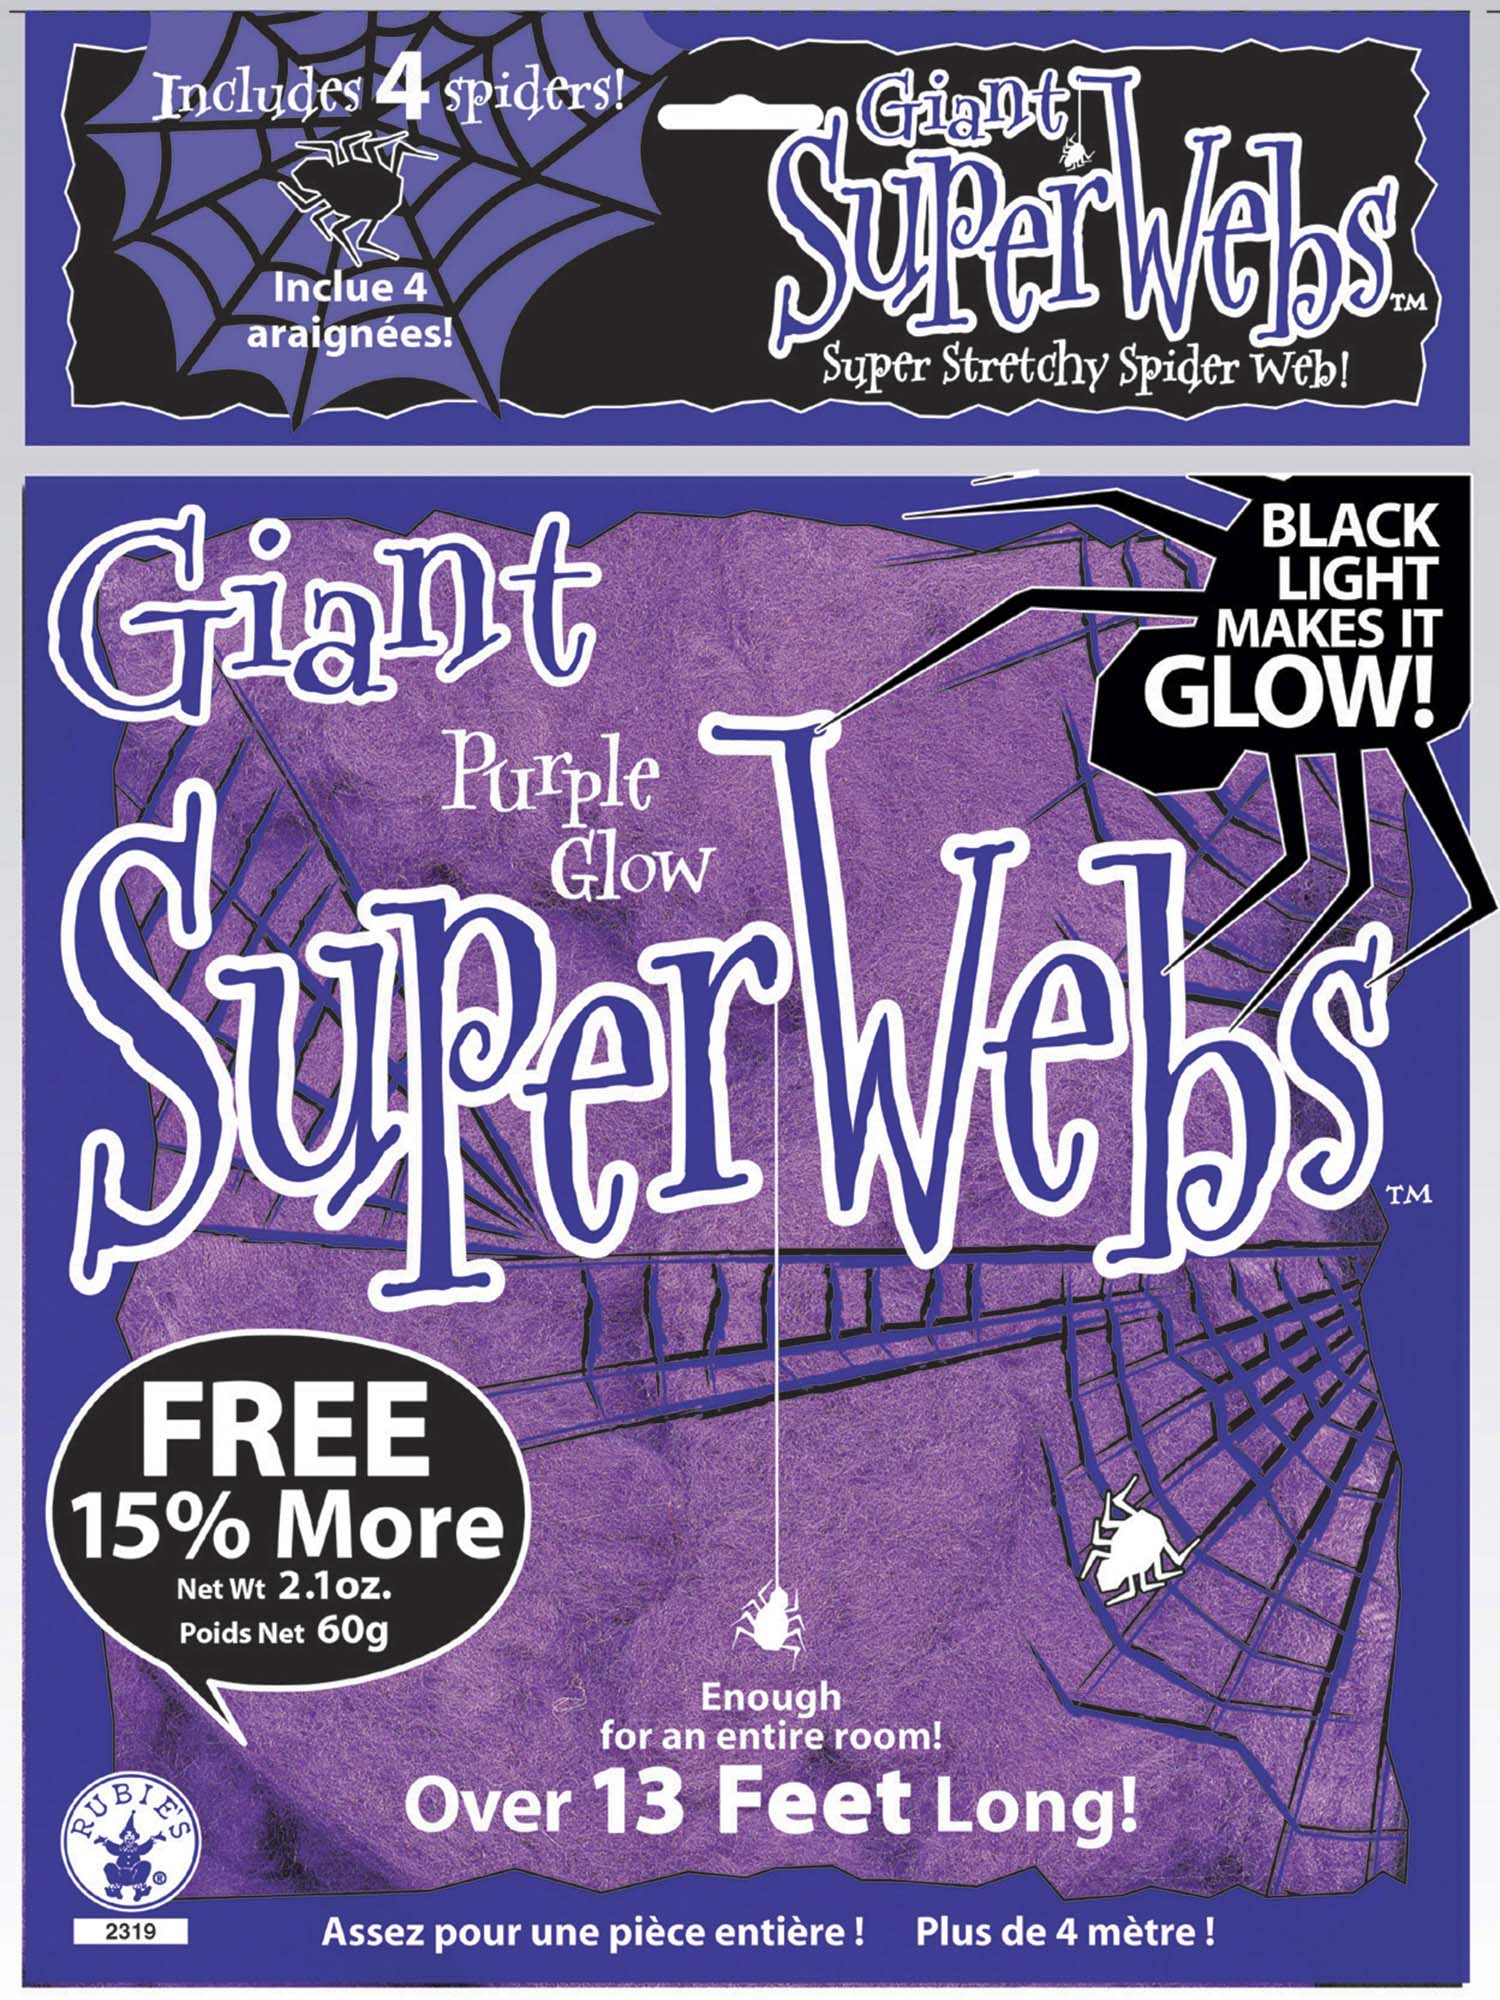 Giant Purple Glow Super Spiderweb with 4 Spiders - 60 Grams - costumes.com